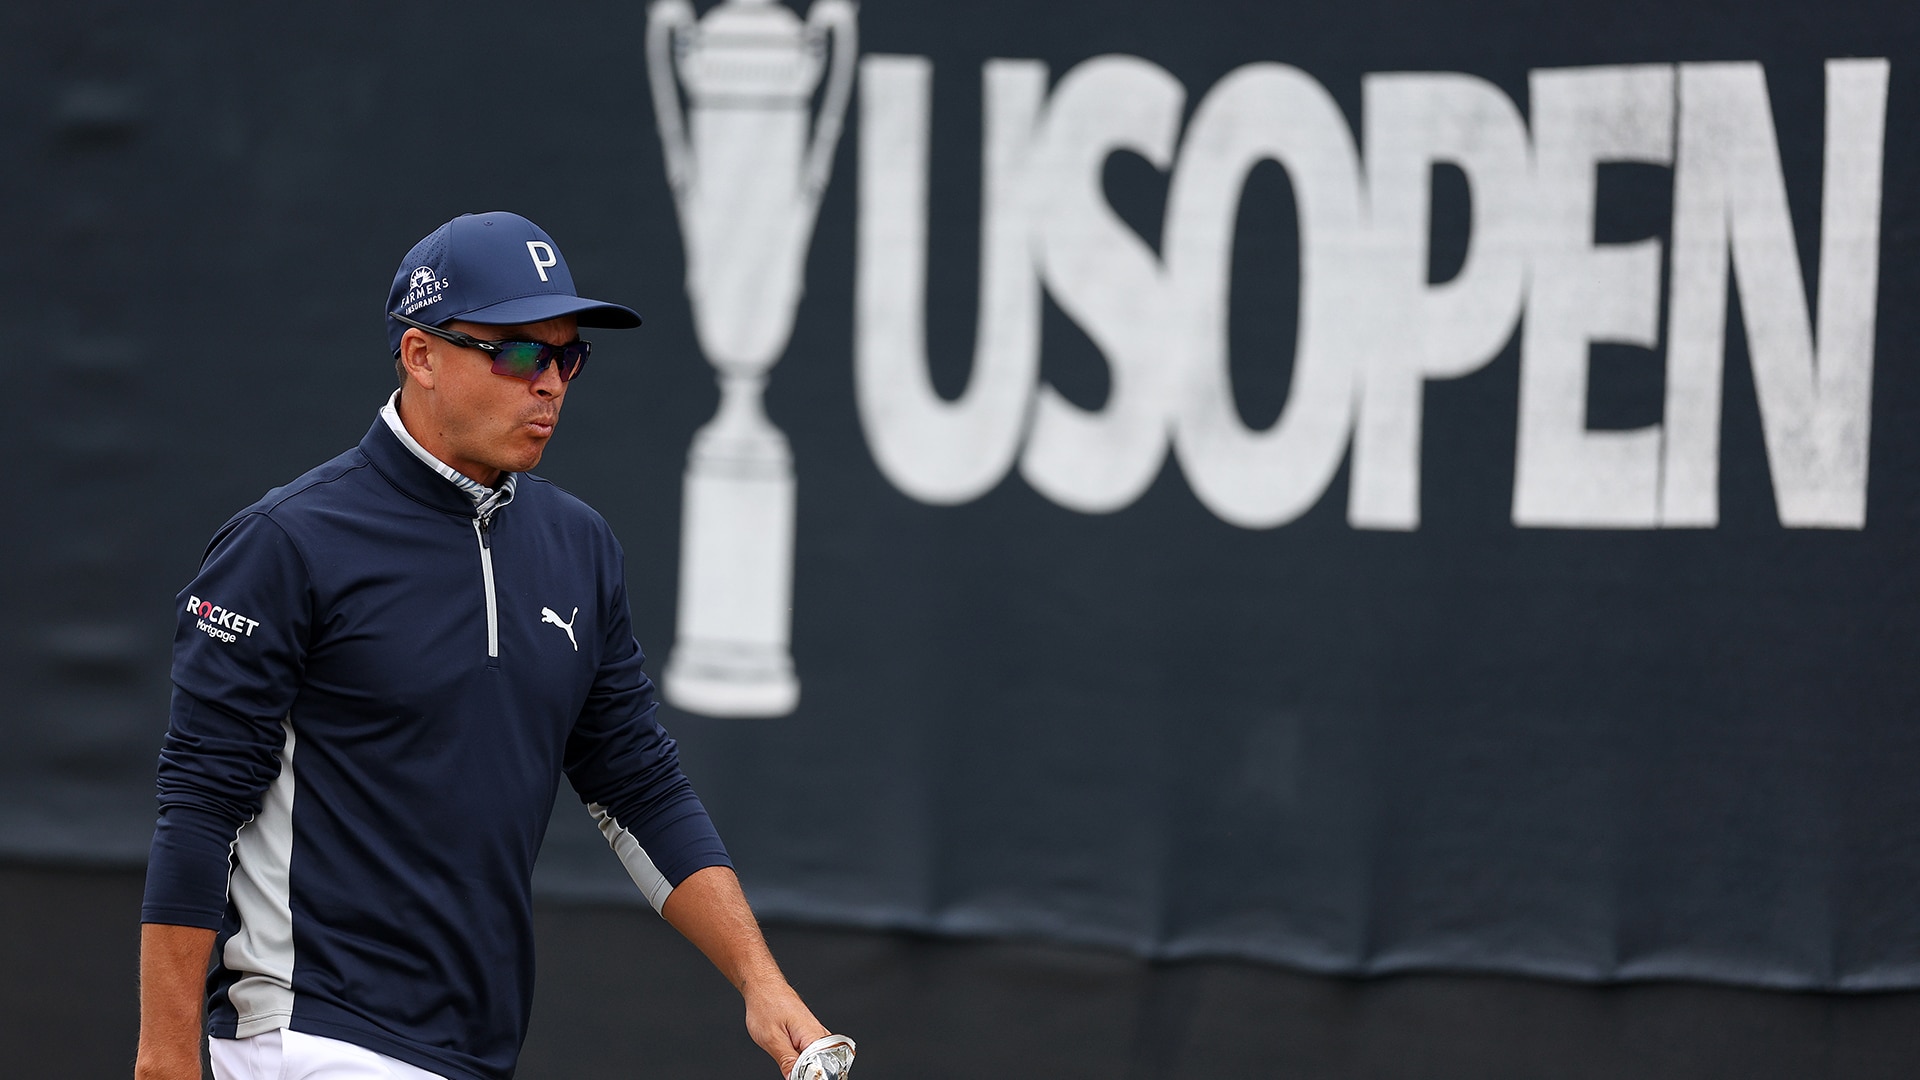 Rickie Fowler happy to be back in the 2023 U.S. Open and among world’s top 50